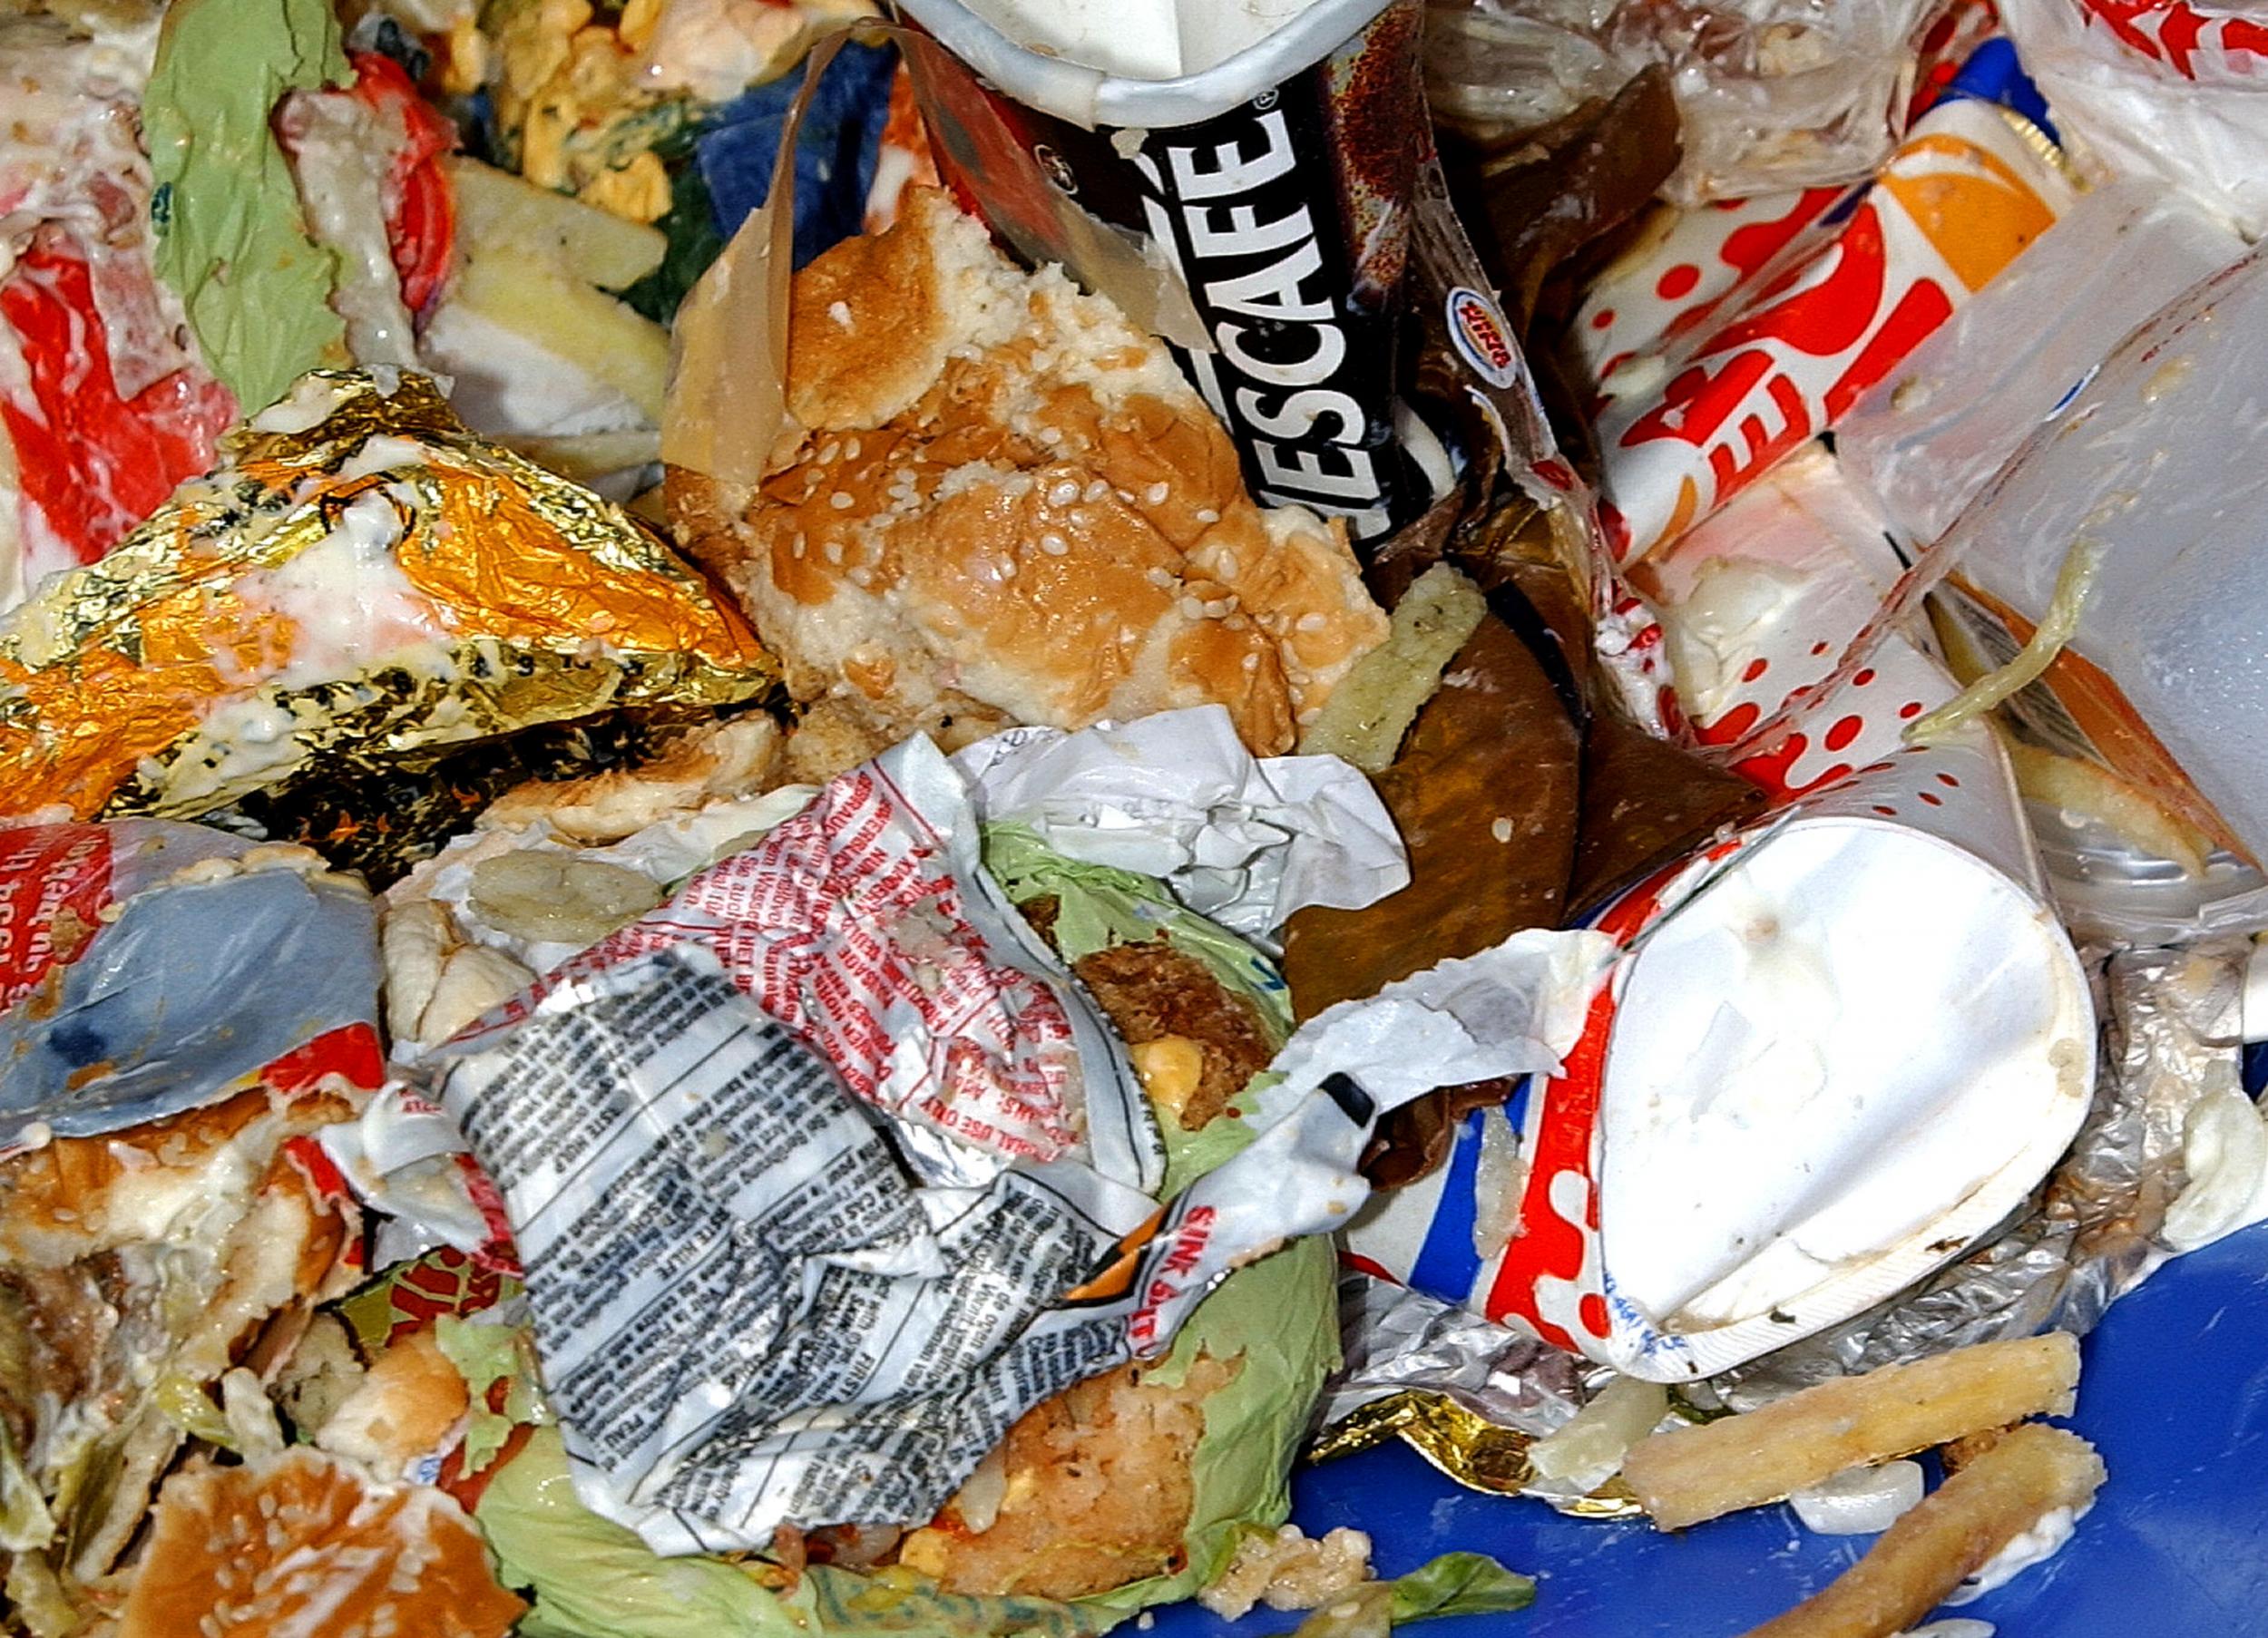 A bin overflows with food waste in central London